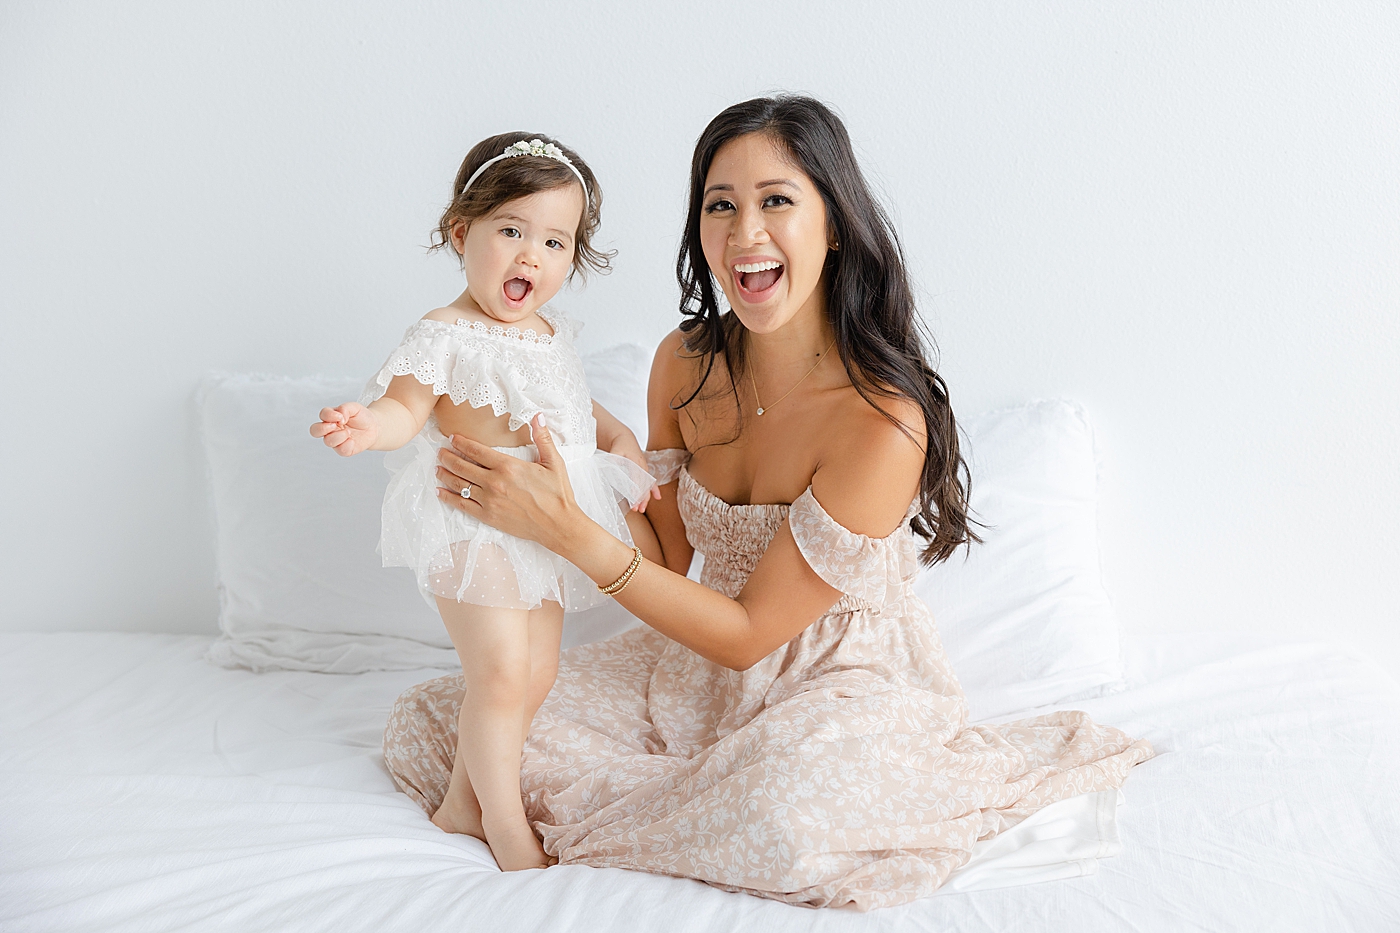 Mom and baby girl sitting on a white bed during her one year studio milestone session | Image by Sana Ahmed Photography